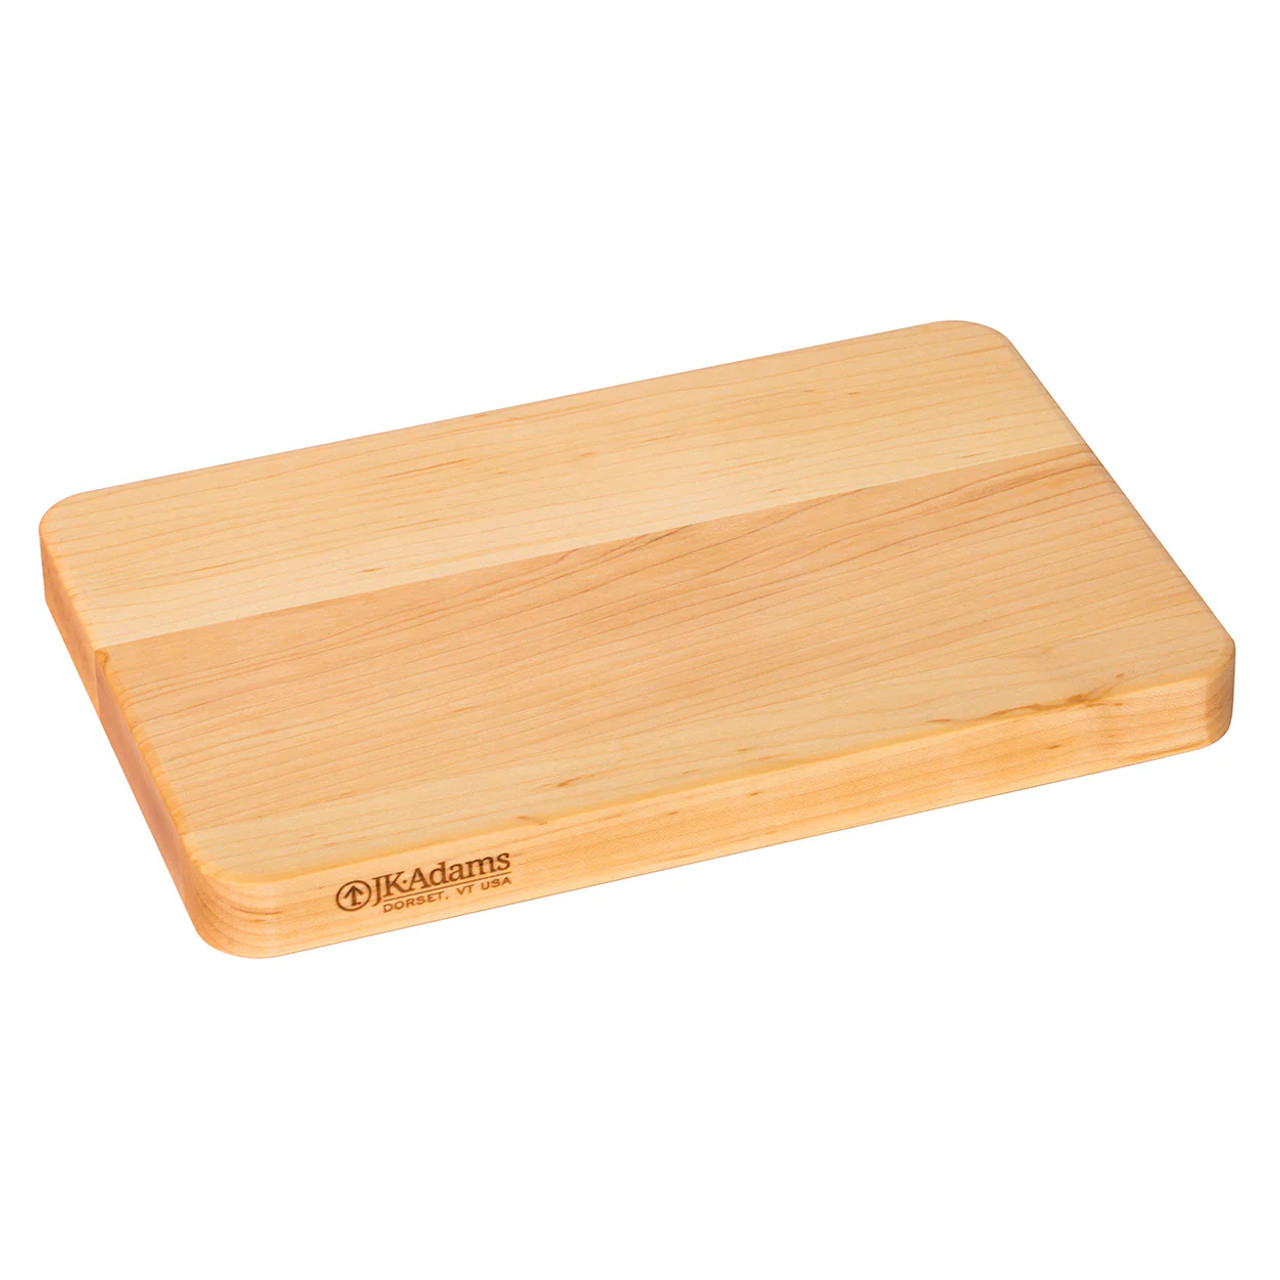 Classic Maple Wood Cutting Board with Handle